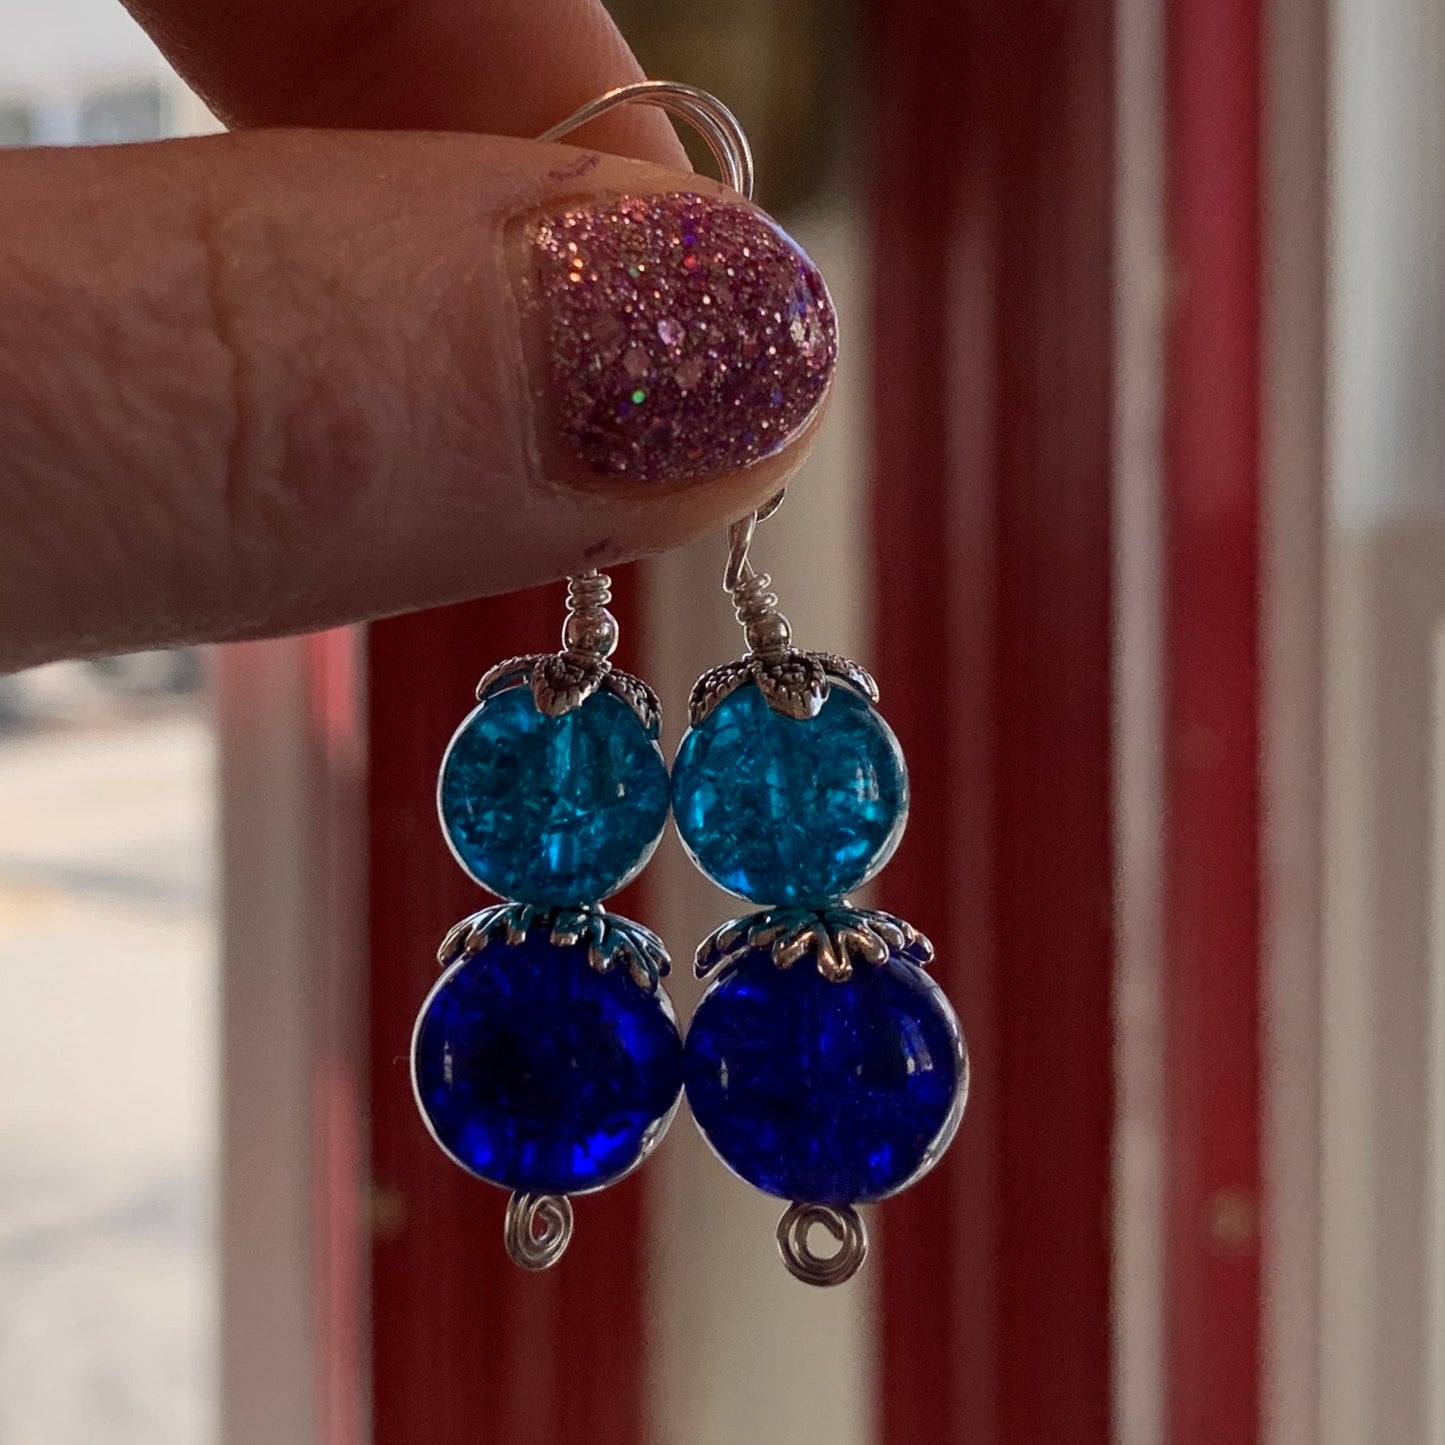 Tiny Evil Genius Earrings: blue and teal